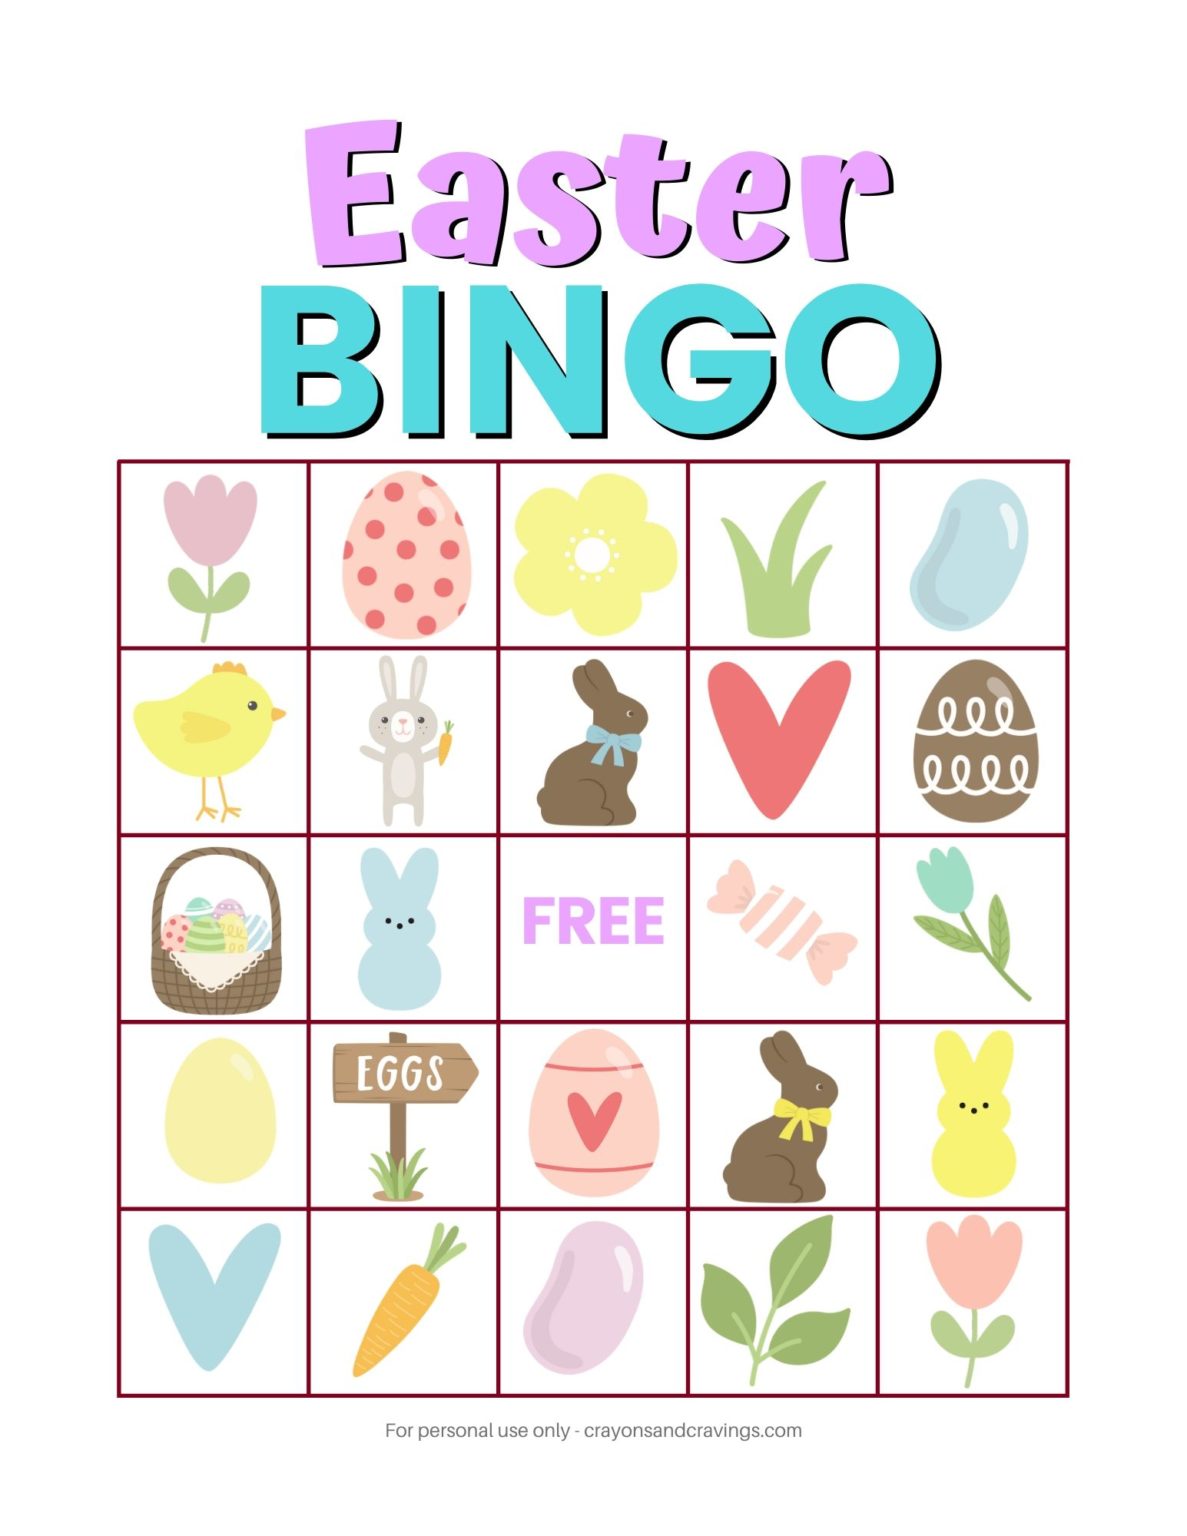 Easter Bingo Free Printable Easter Game with 10 Different Cards!